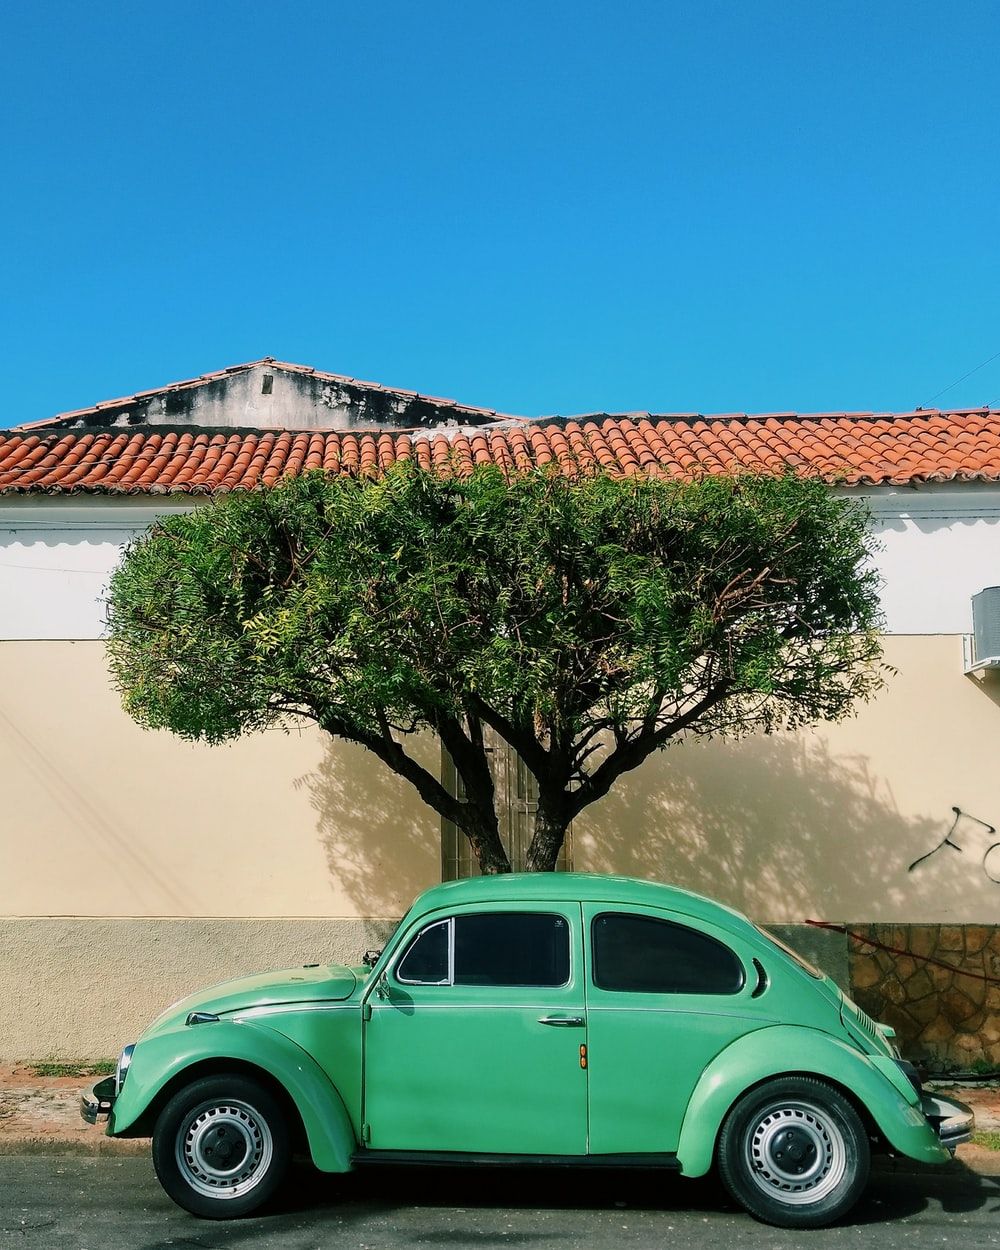 Green Car Picture. Download Free Image